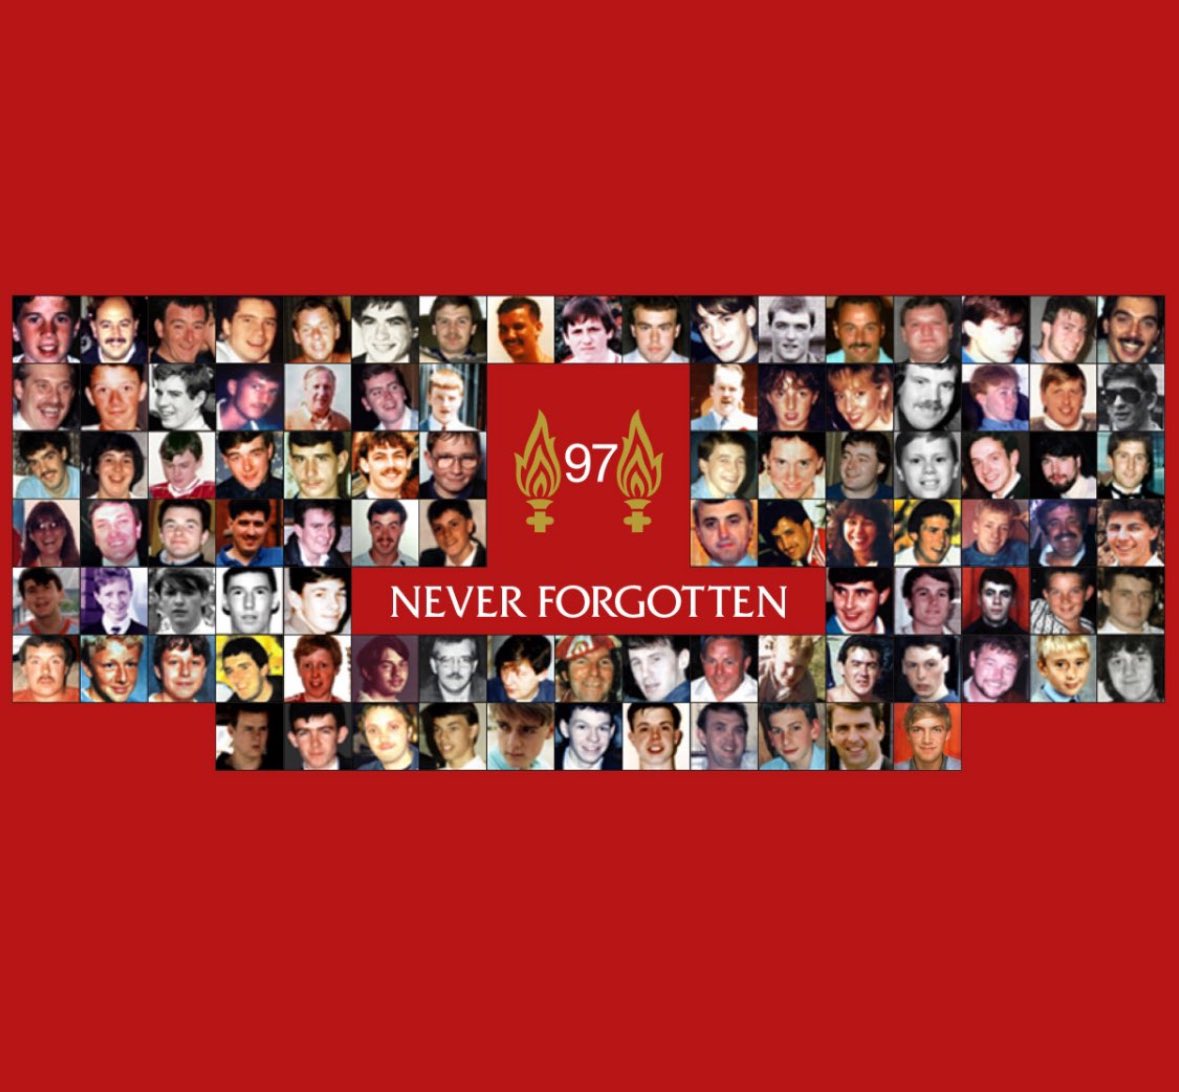 Never forgotten, justice for the 97 #JFT97